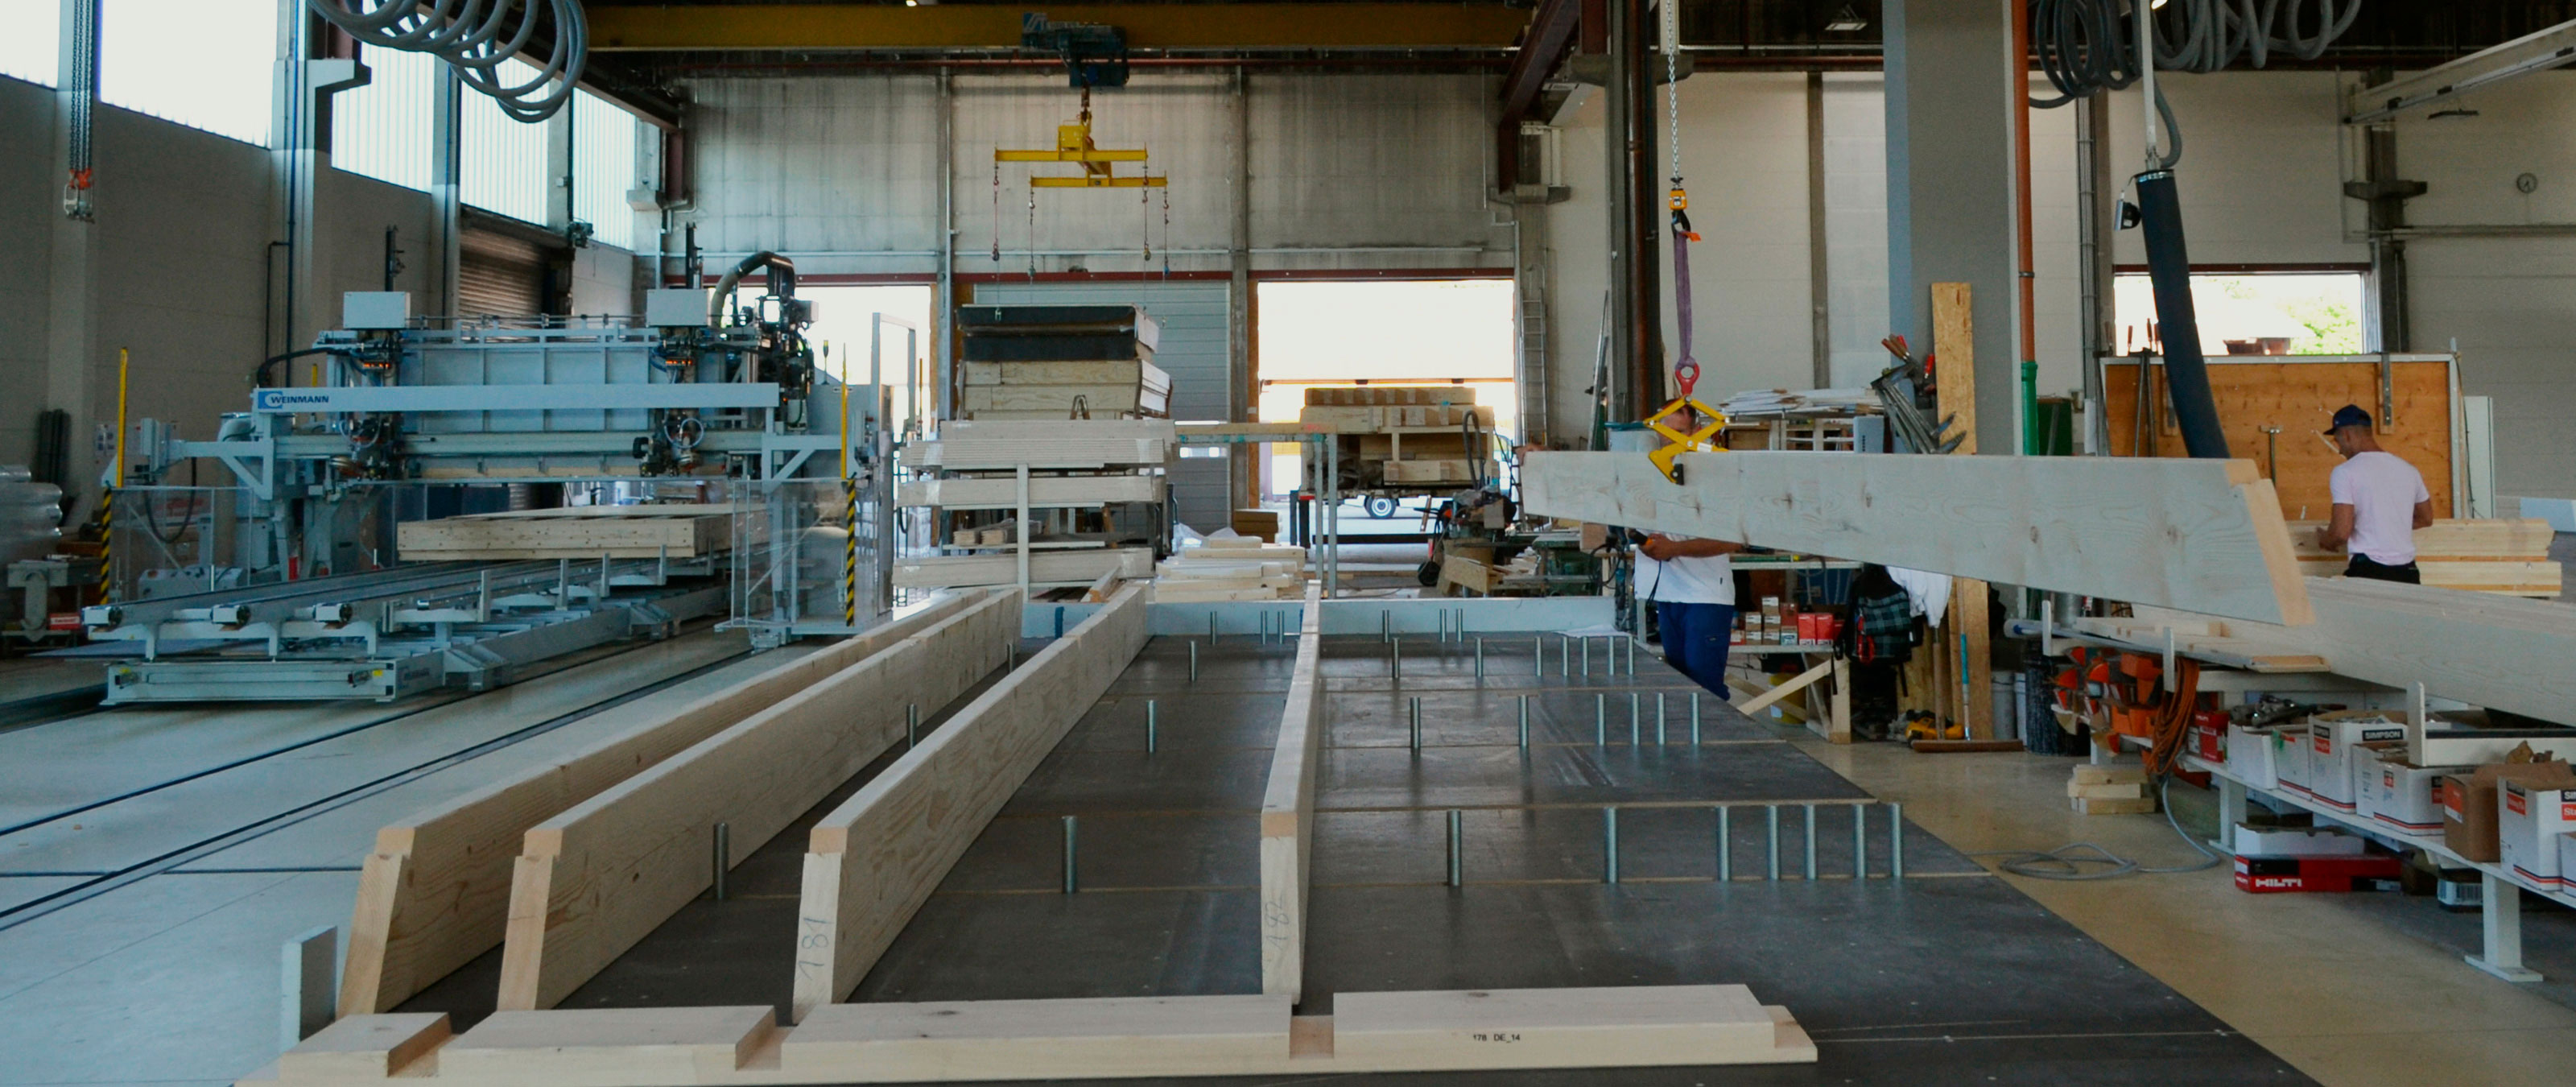 WEINMANN Roof and ceiling production line for prefabricated houses with nailing bridges and framingtables